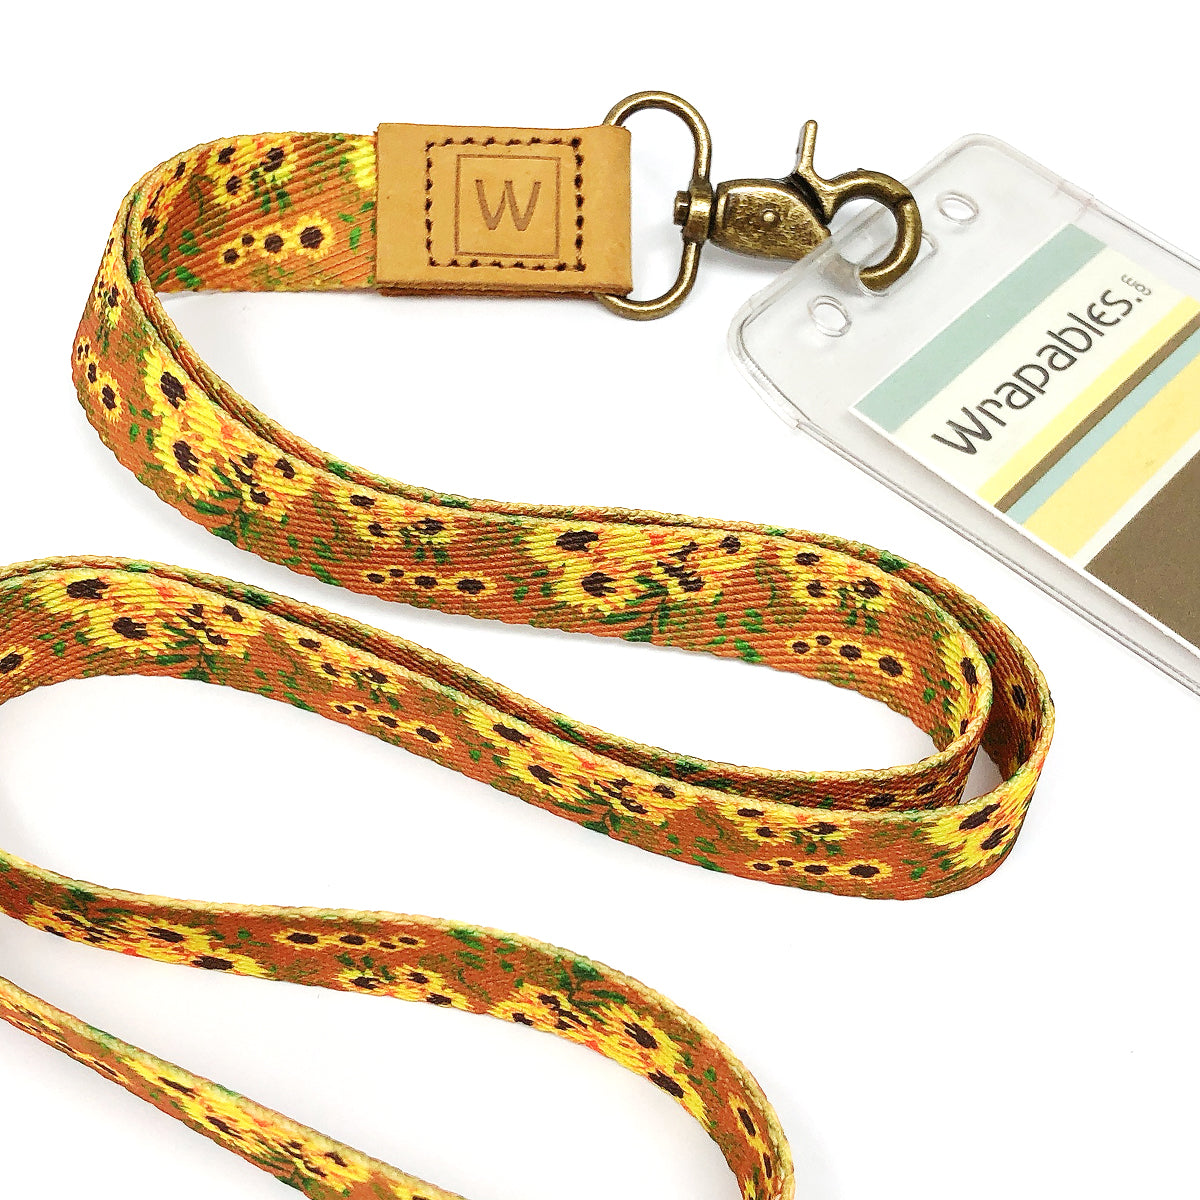 Wrapables Lanyard Keychain and ID Badge Holder Sunflowers Tan